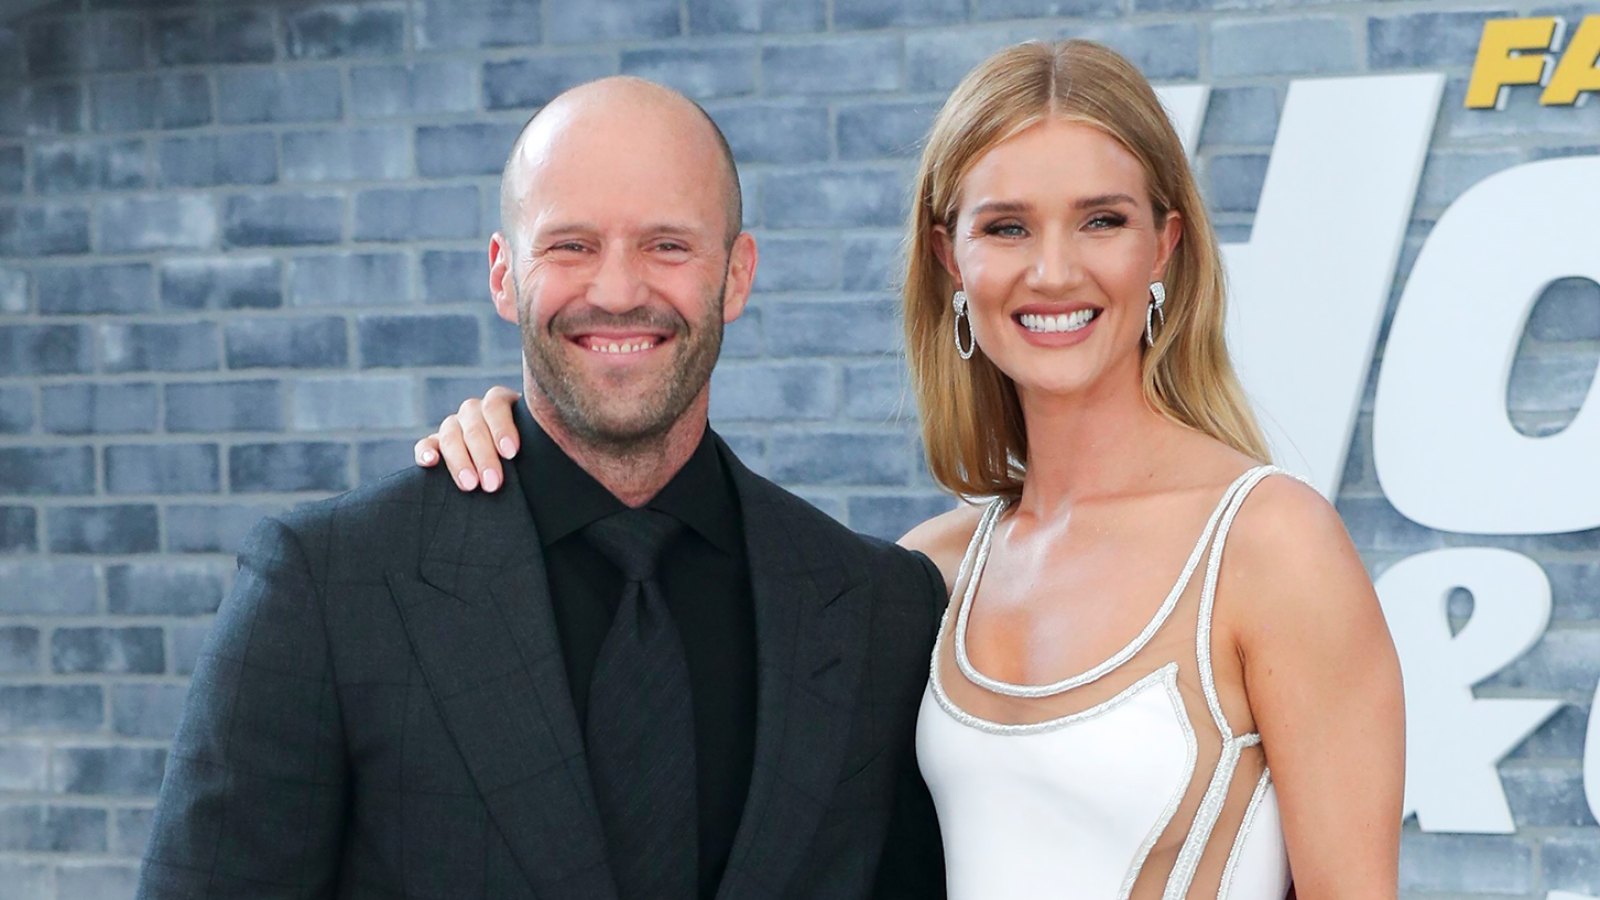 Rosie Huntington-Whiteley Is Pregnant, Expecting 2nd Child With Jason Statham